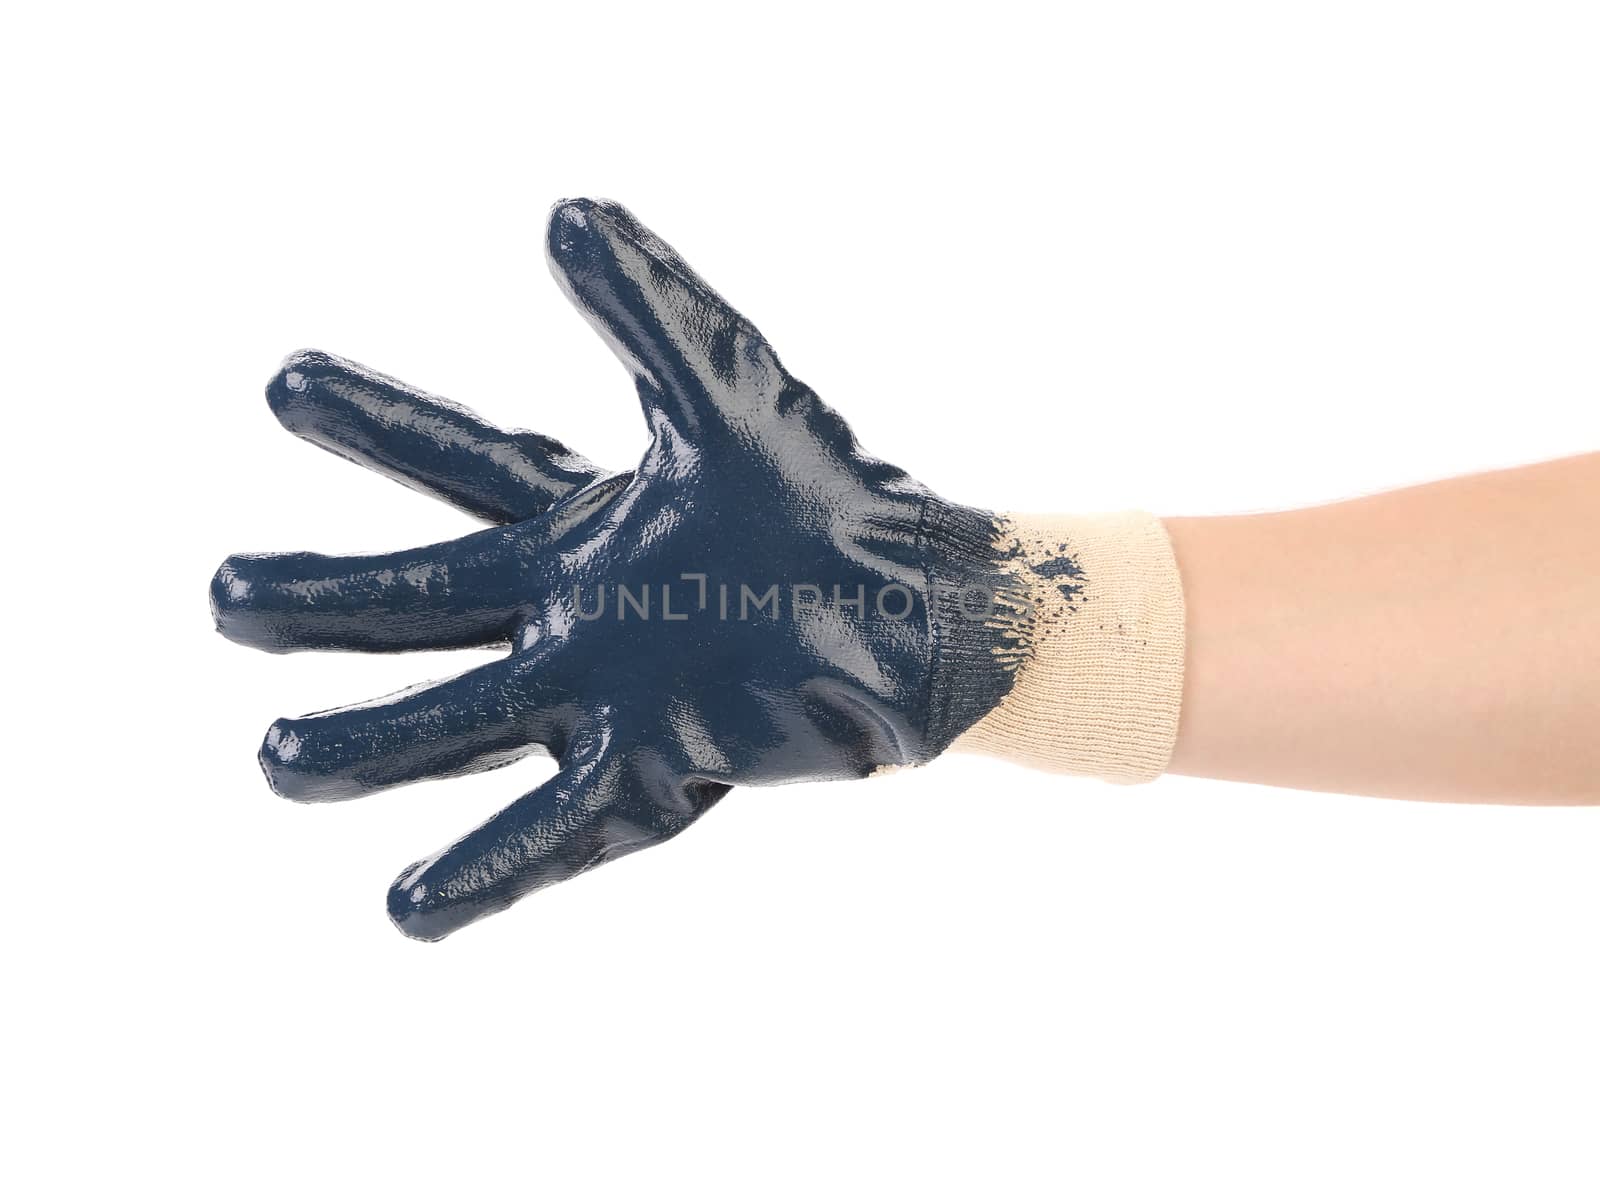 Blue protective glove. Isolated on a white background.